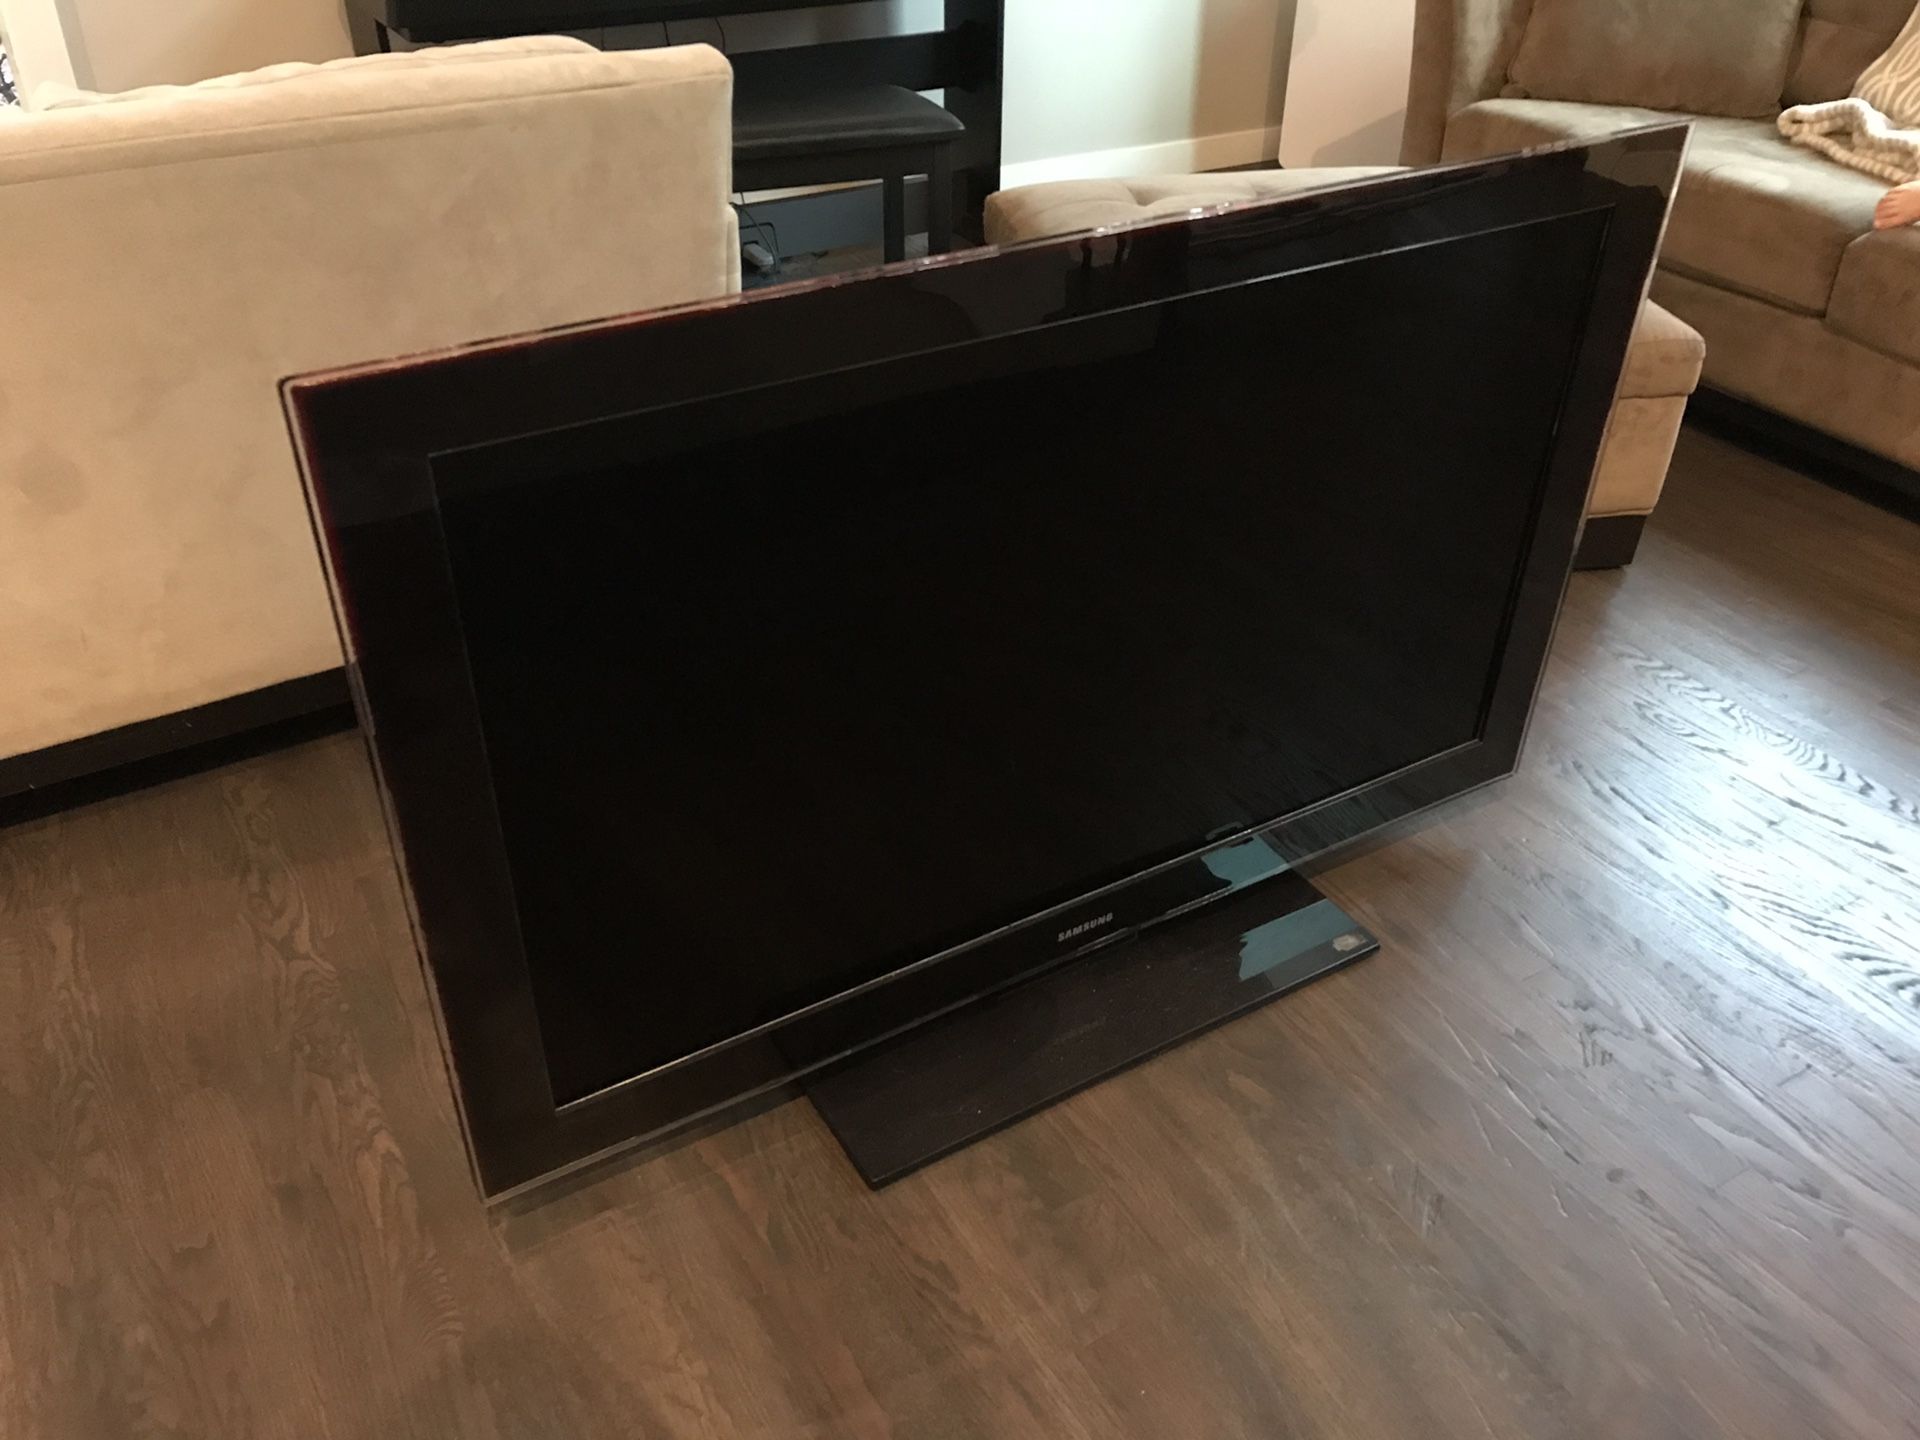 55” LCD Samsung TV with Extendable TV Mount for Wall